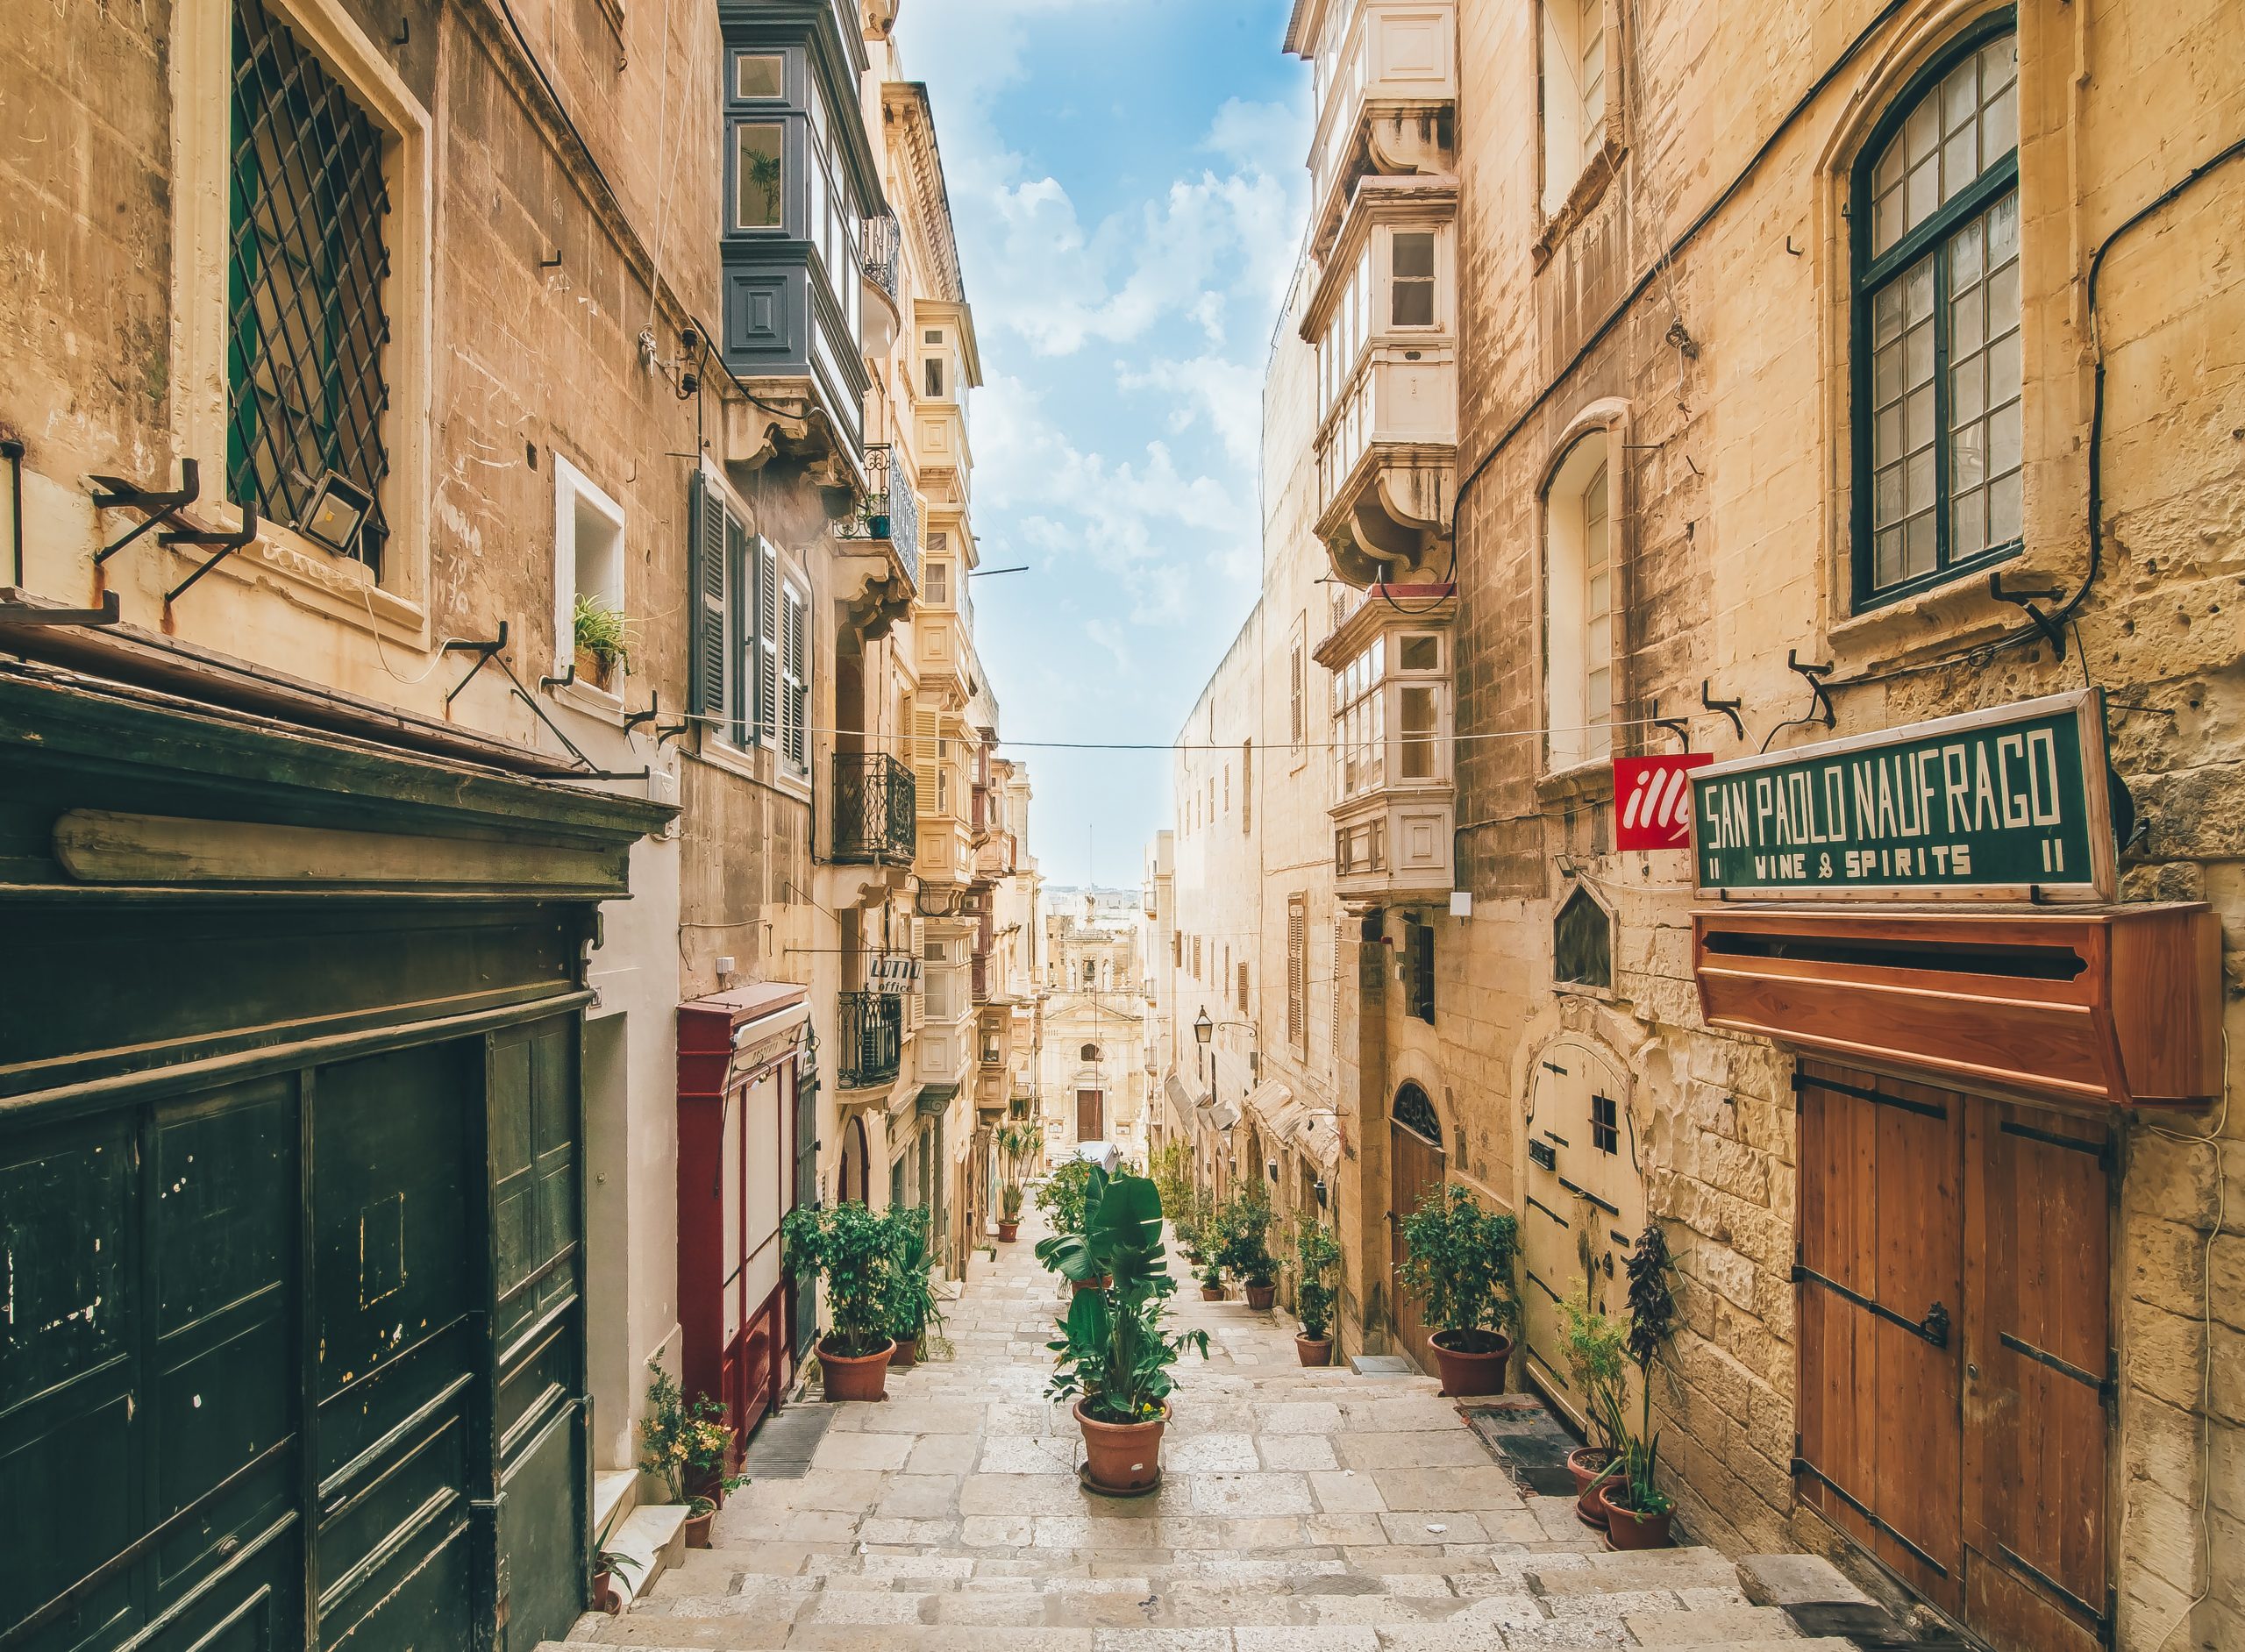 Gzira in Malta is a great place to stay for laid back tourists